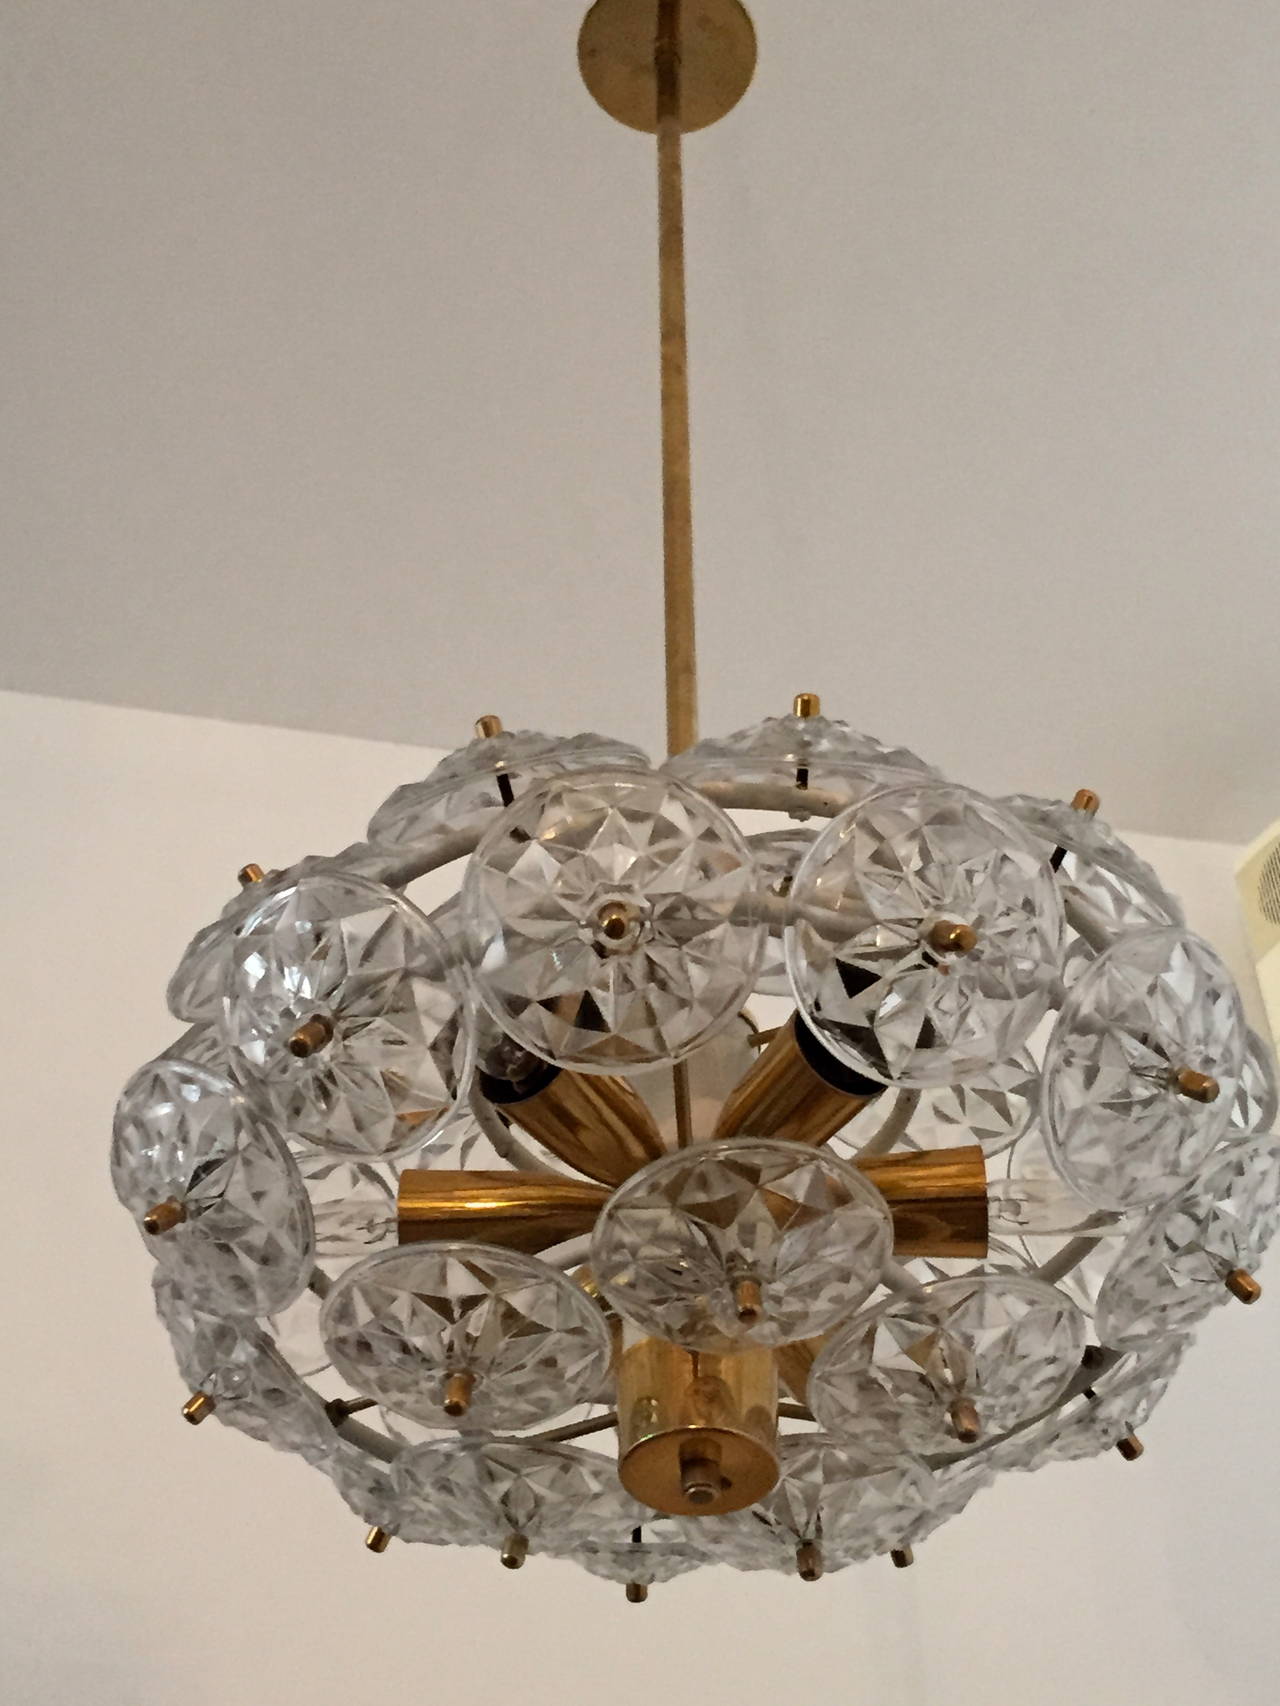 A great pair of 1960s Austrian glass pendants by Kindeldey. Rewired. 6 ea. candelabra bulbs, 25 - 40 watts. 240 watt max. We can place them on a matching decorative chain if needed.